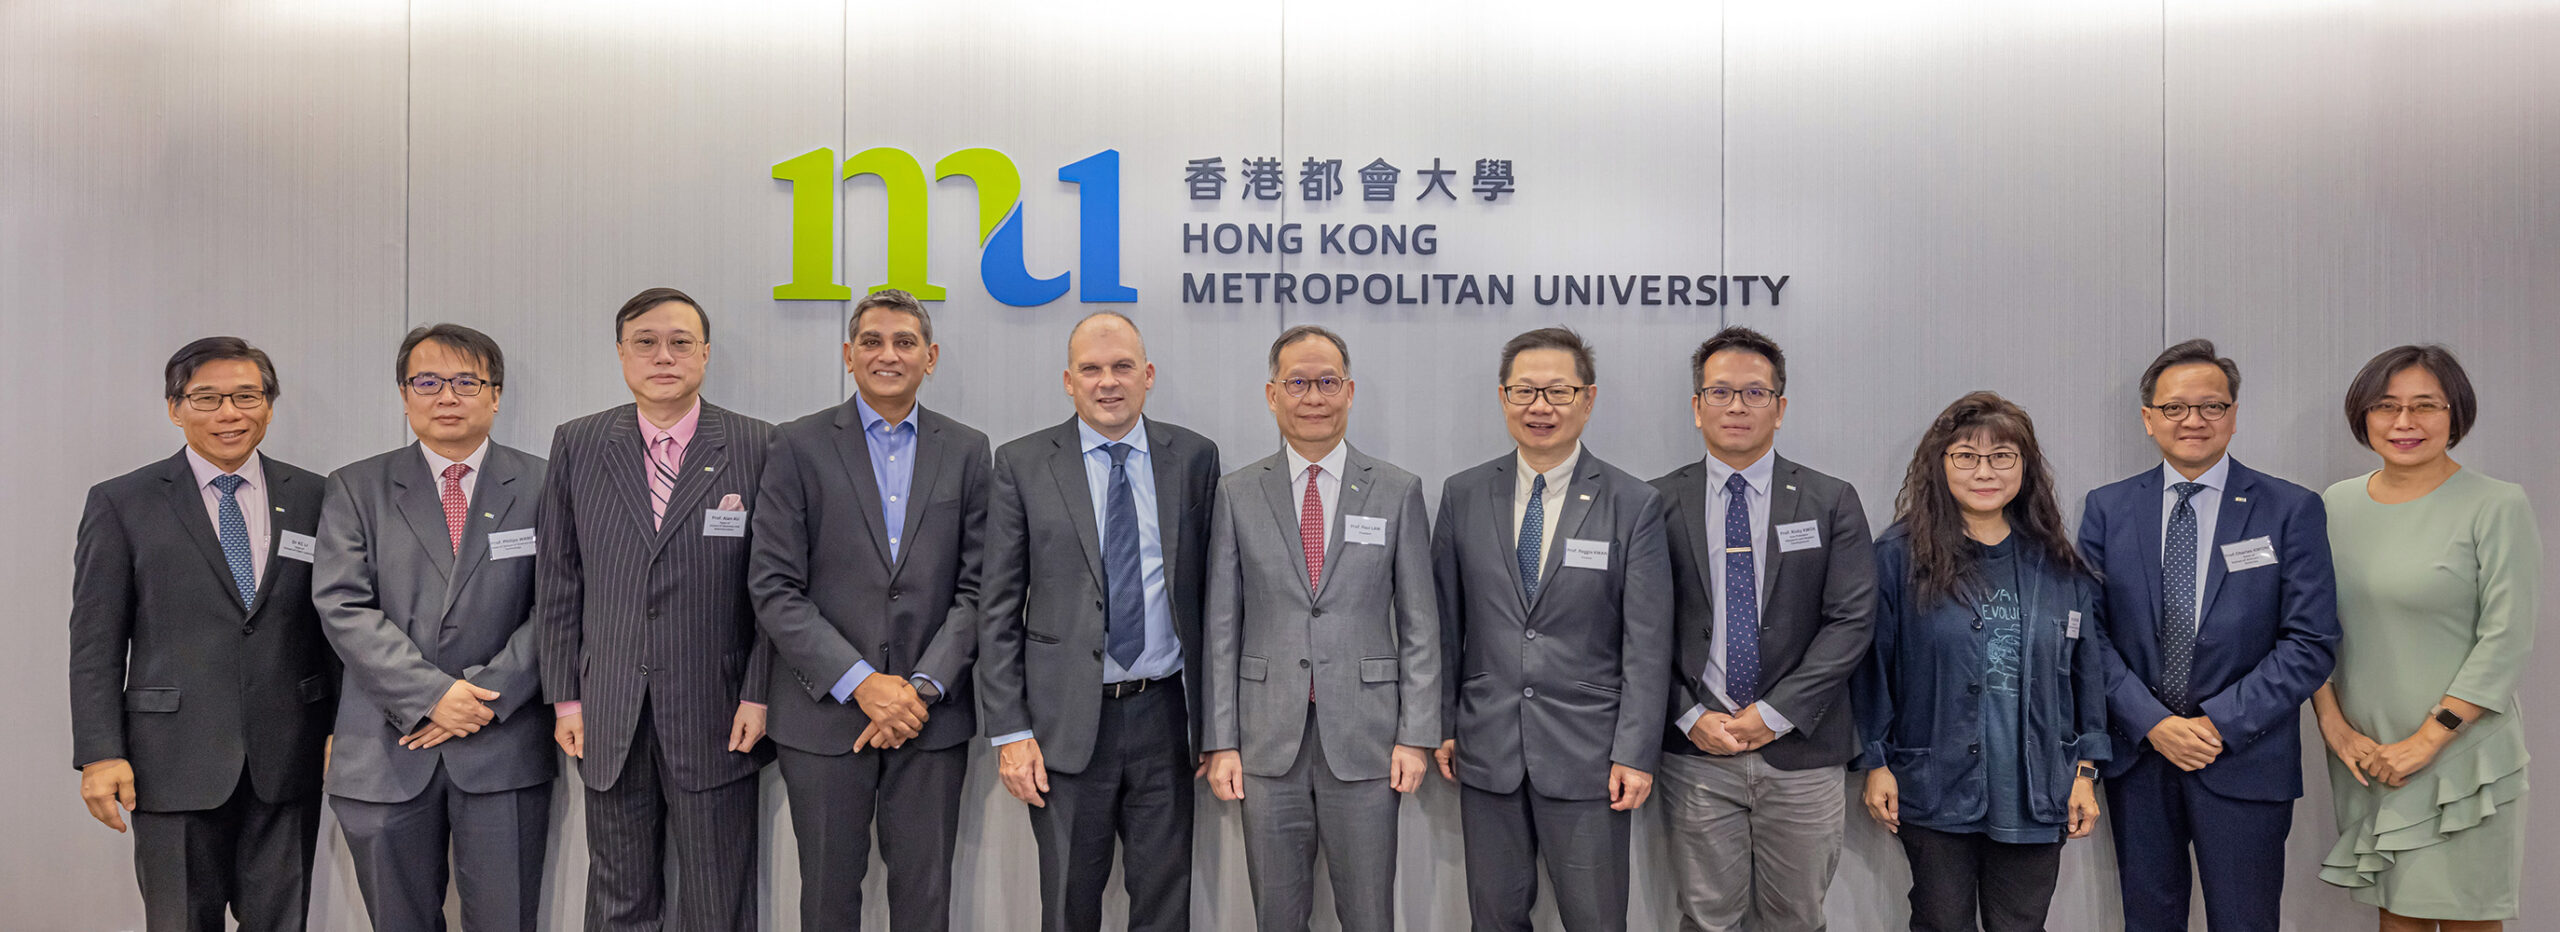 The MoU signing ceremony is attended by representatives of HKMU and OUUK.  The MoU signifies the setup of a framework for enhanced collaboration between the two universities in various areas of academic research.